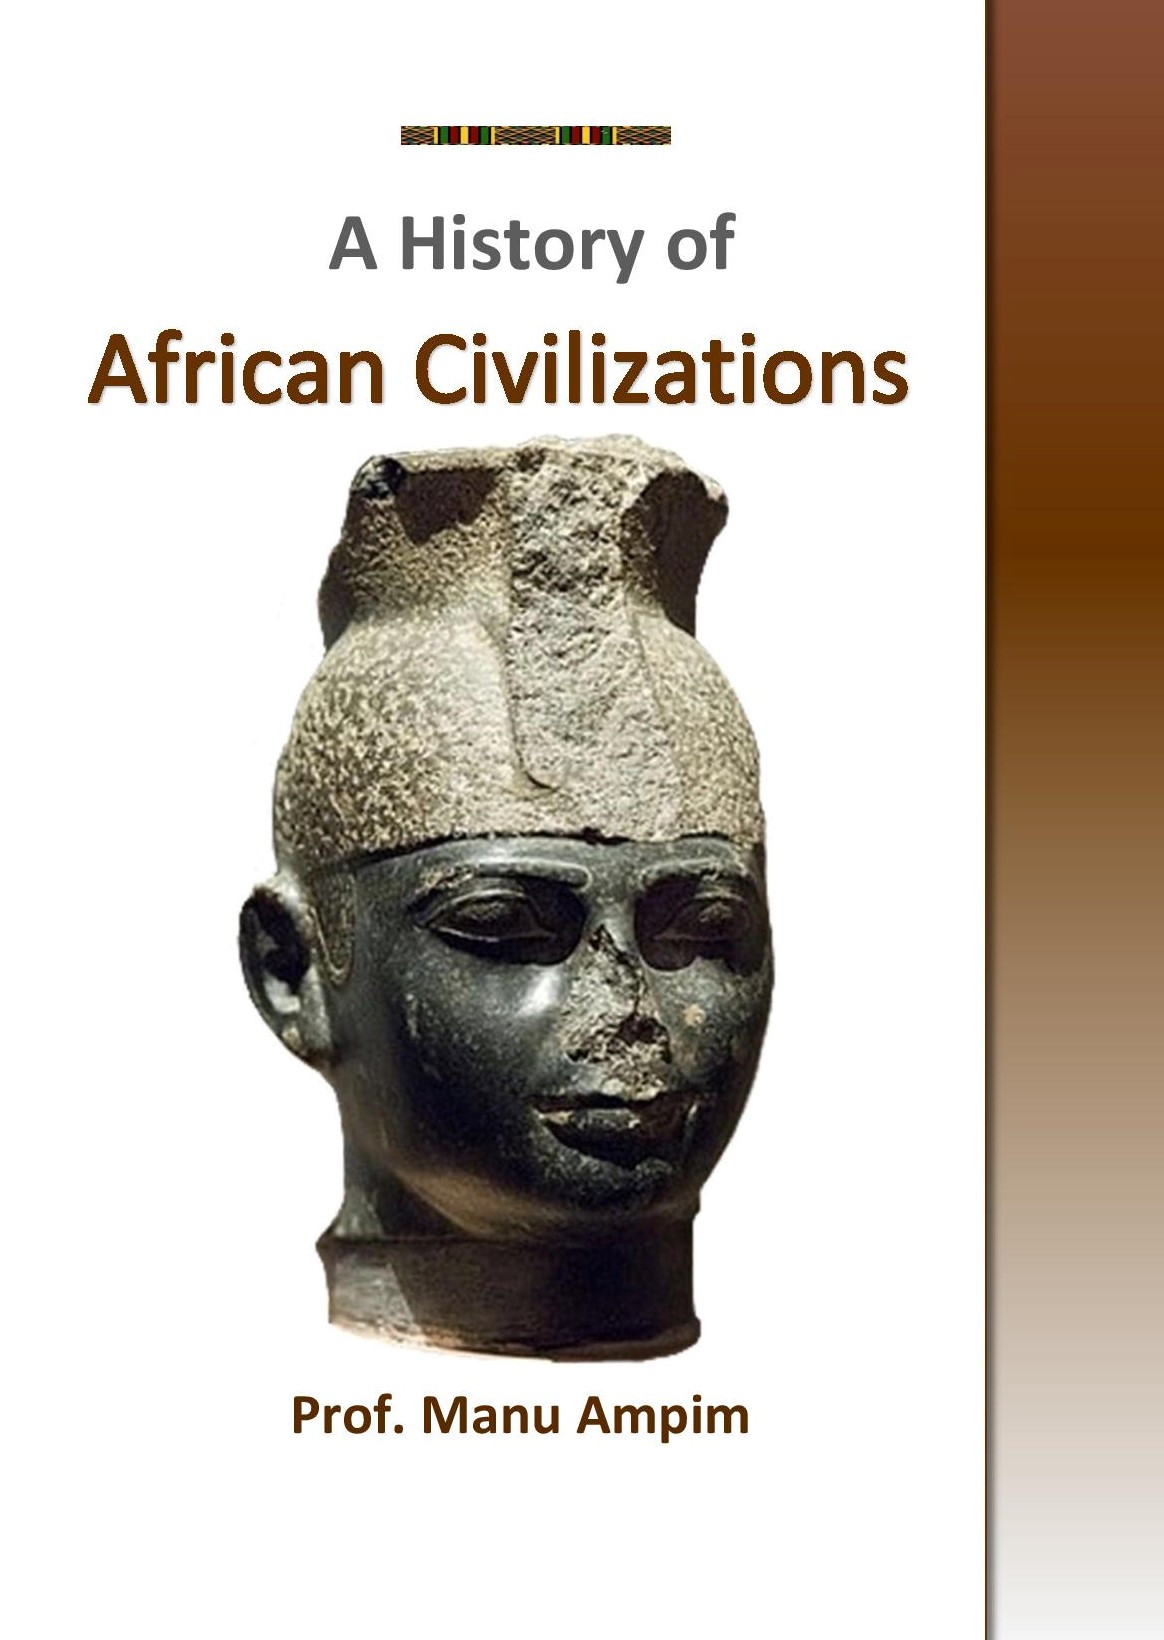 A-History-of-African-Civilizations-by-Prof.-Manu-Ampim-cover, Noted historian reveals a major omission in college courses, Culture Currents 